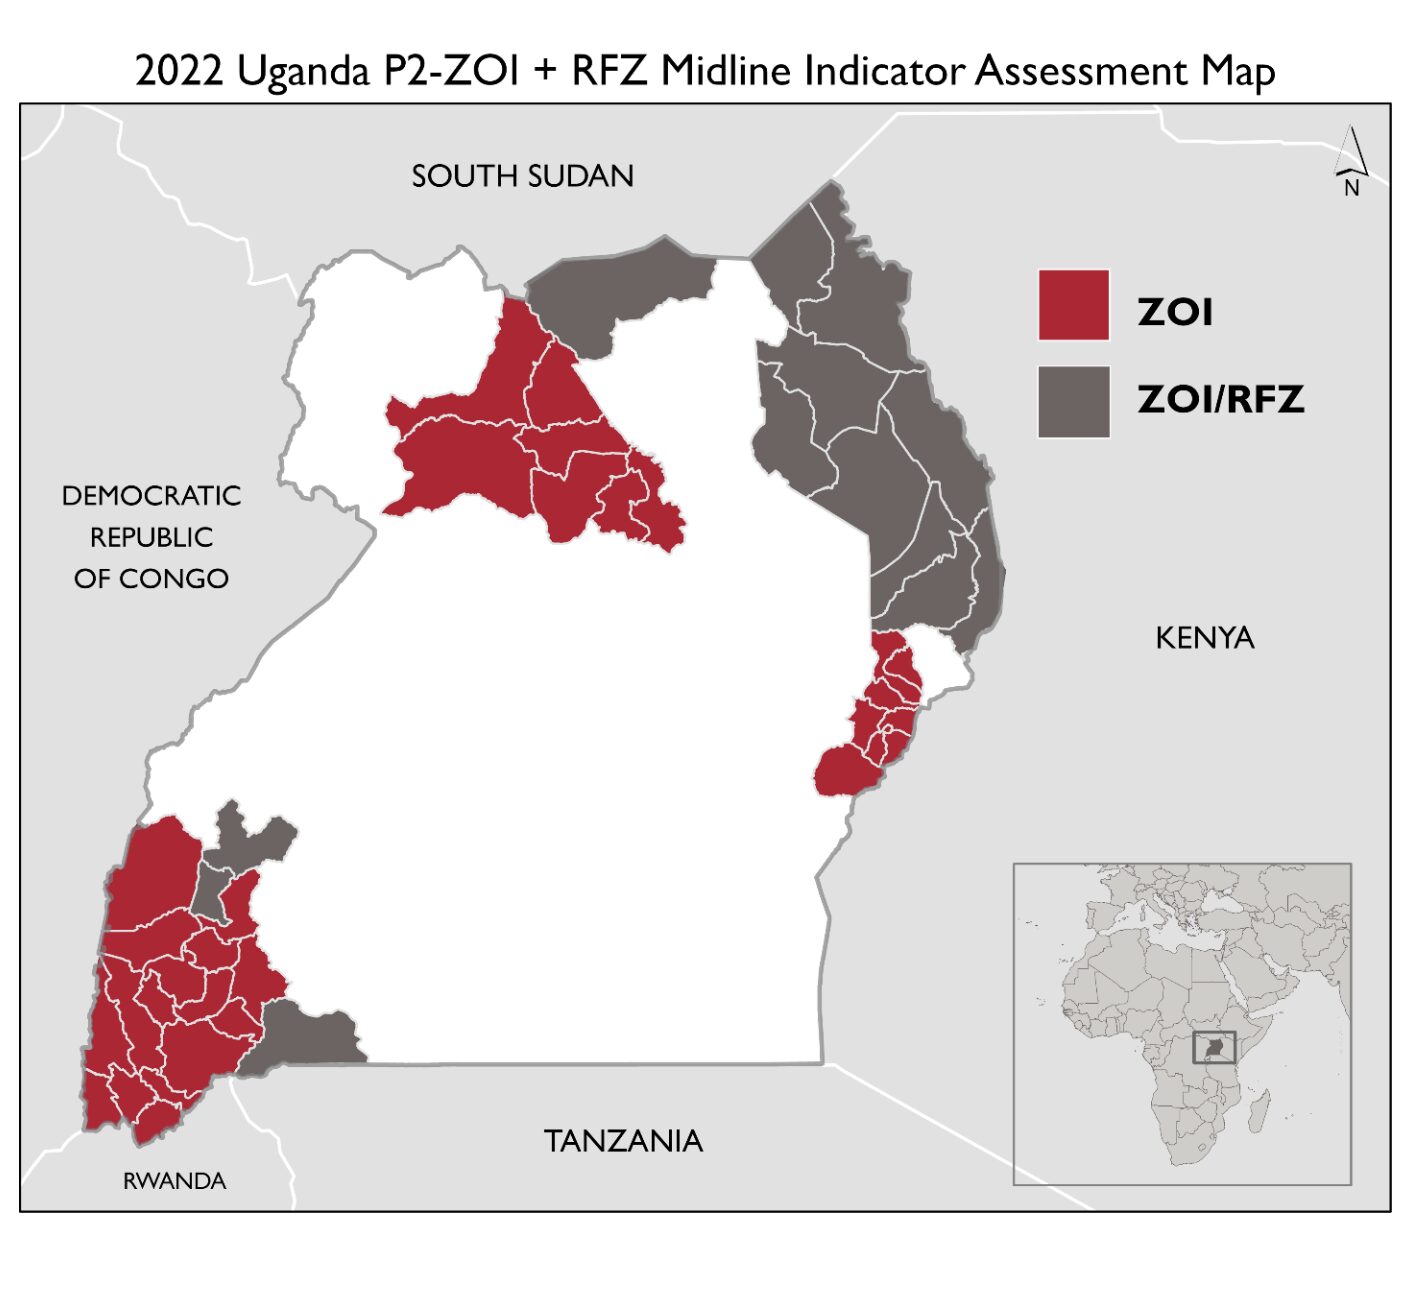 SMRFS food security project map